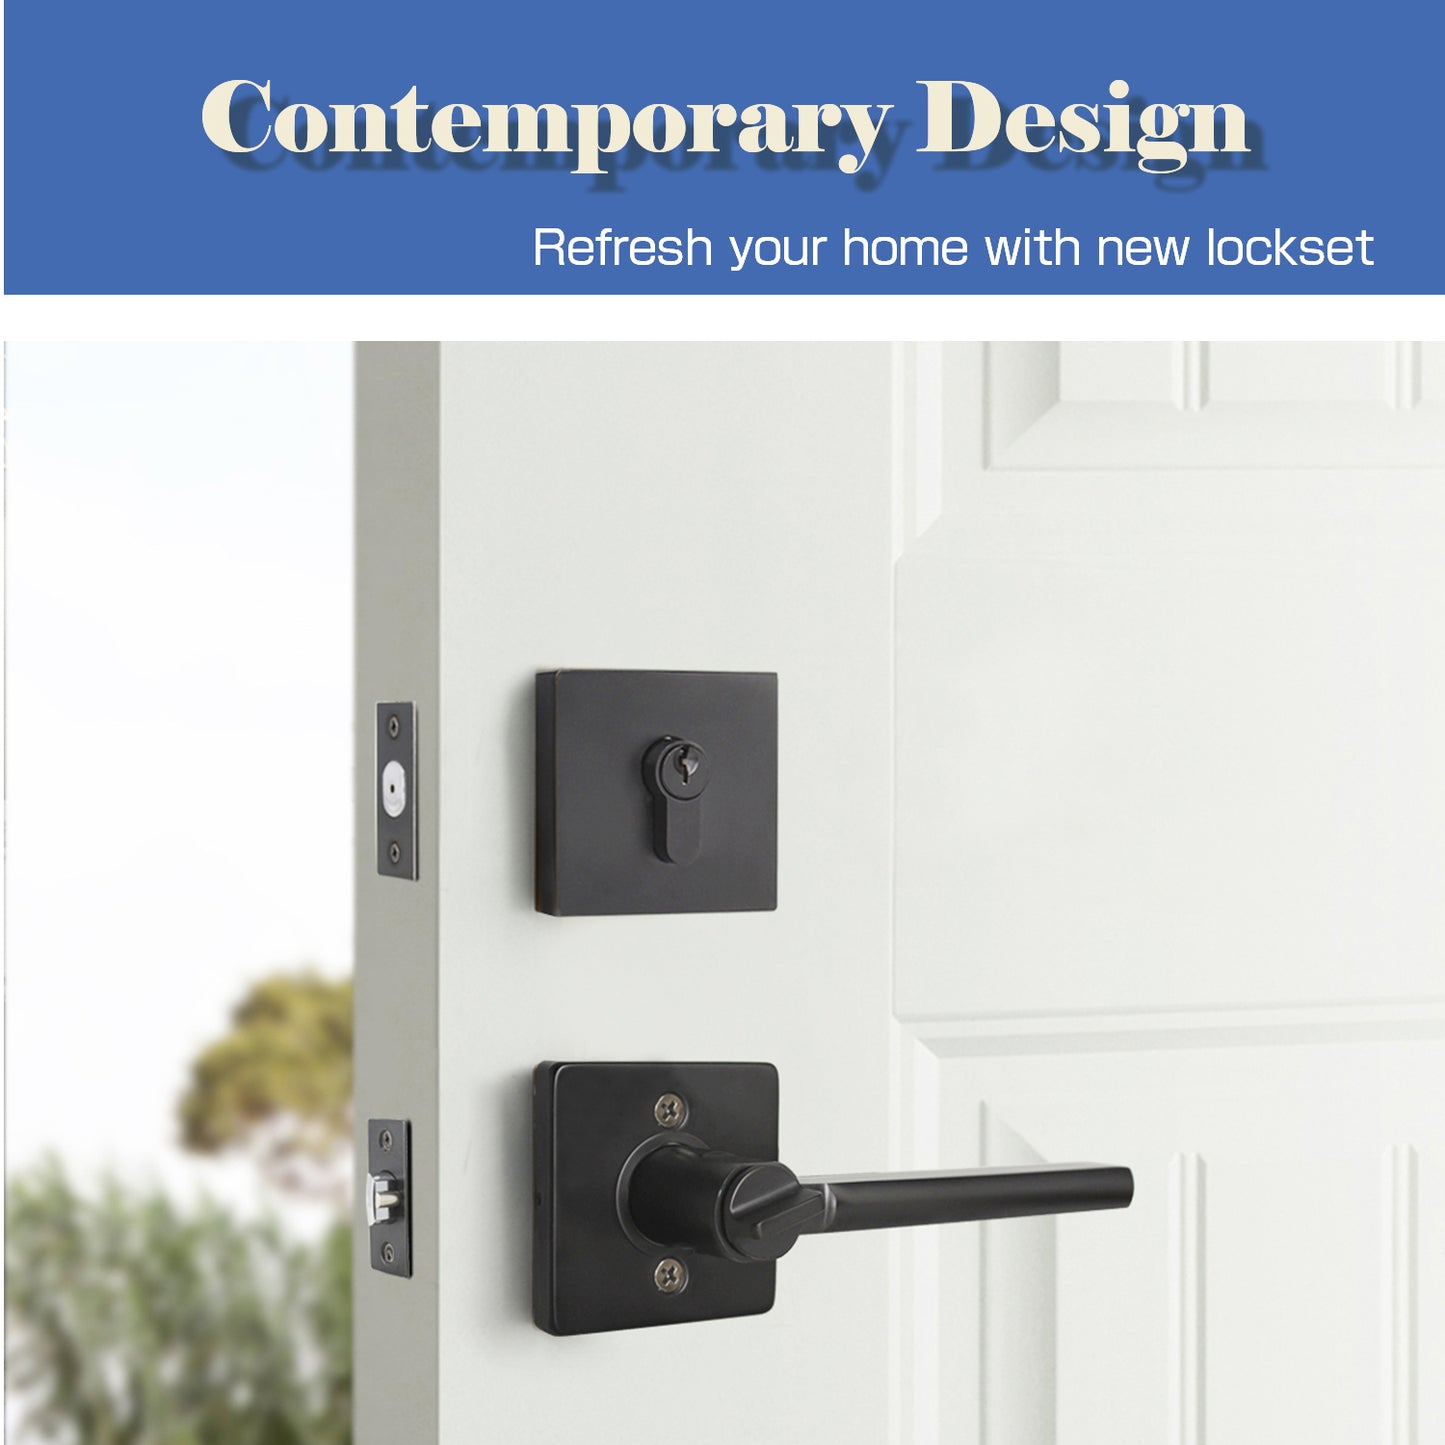 Double Keyed Lockset Mid Centuty Square Plate Slim Entrance Door Handle with Matching Square Deadbolts - DL1603ET104BK